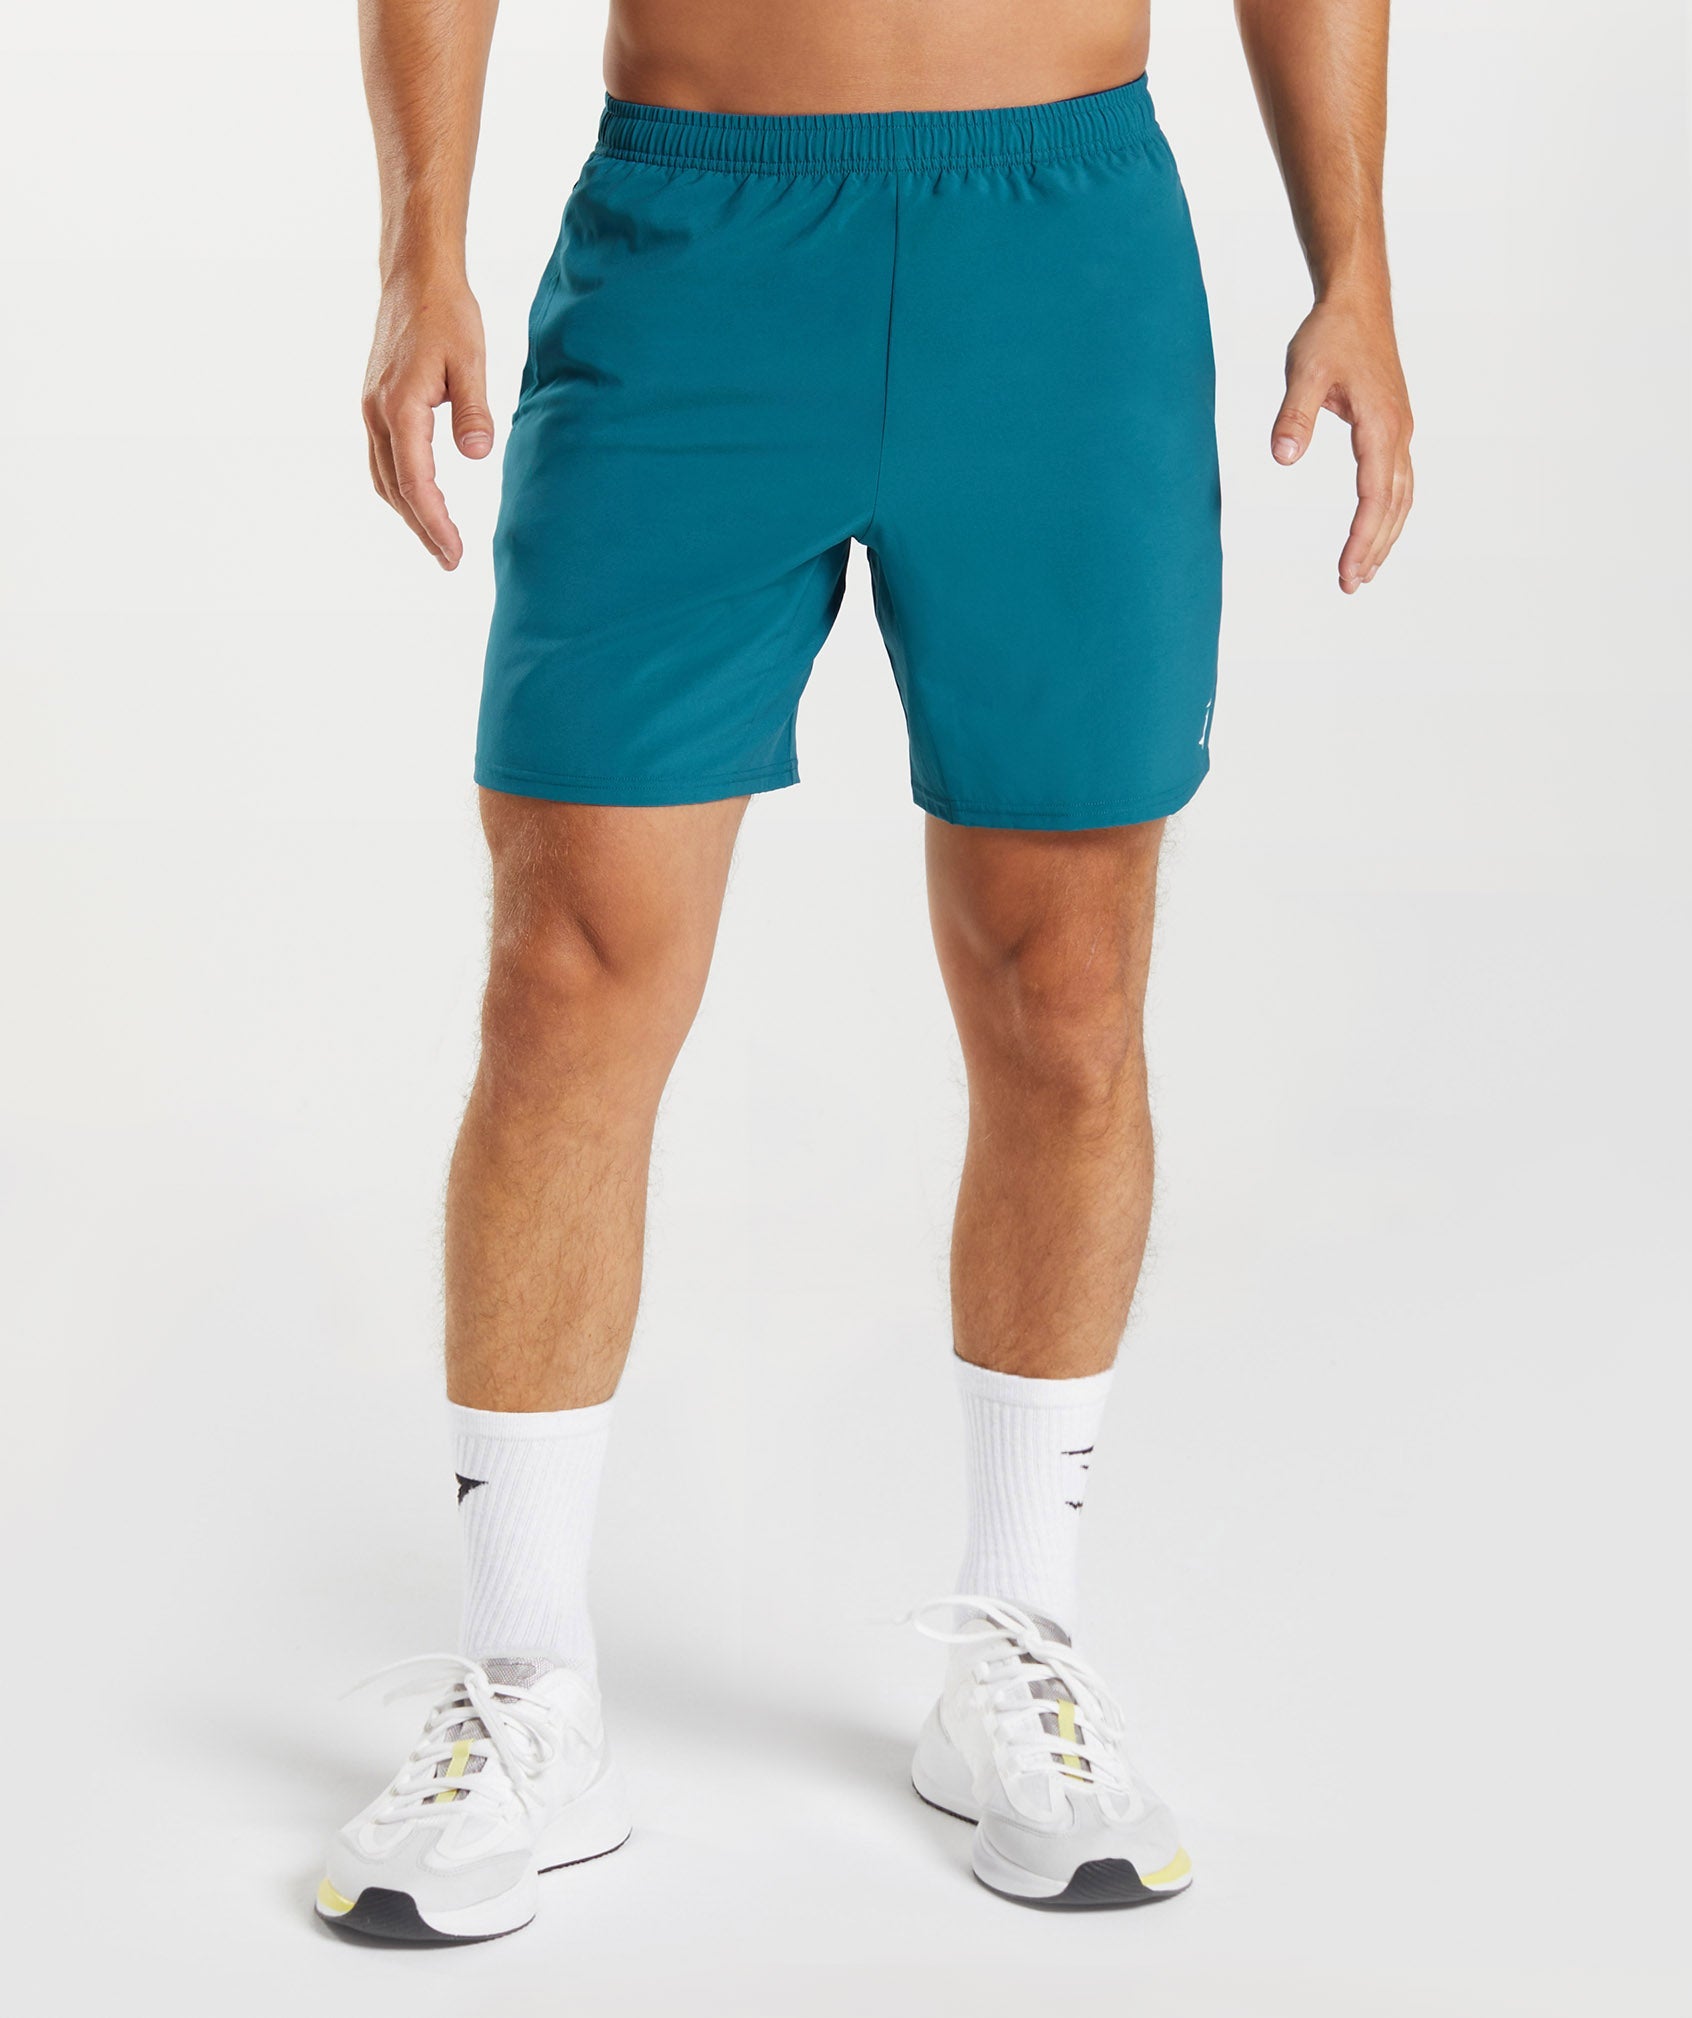 Arrival 7" Shorts in Atlantic Blue - view 1